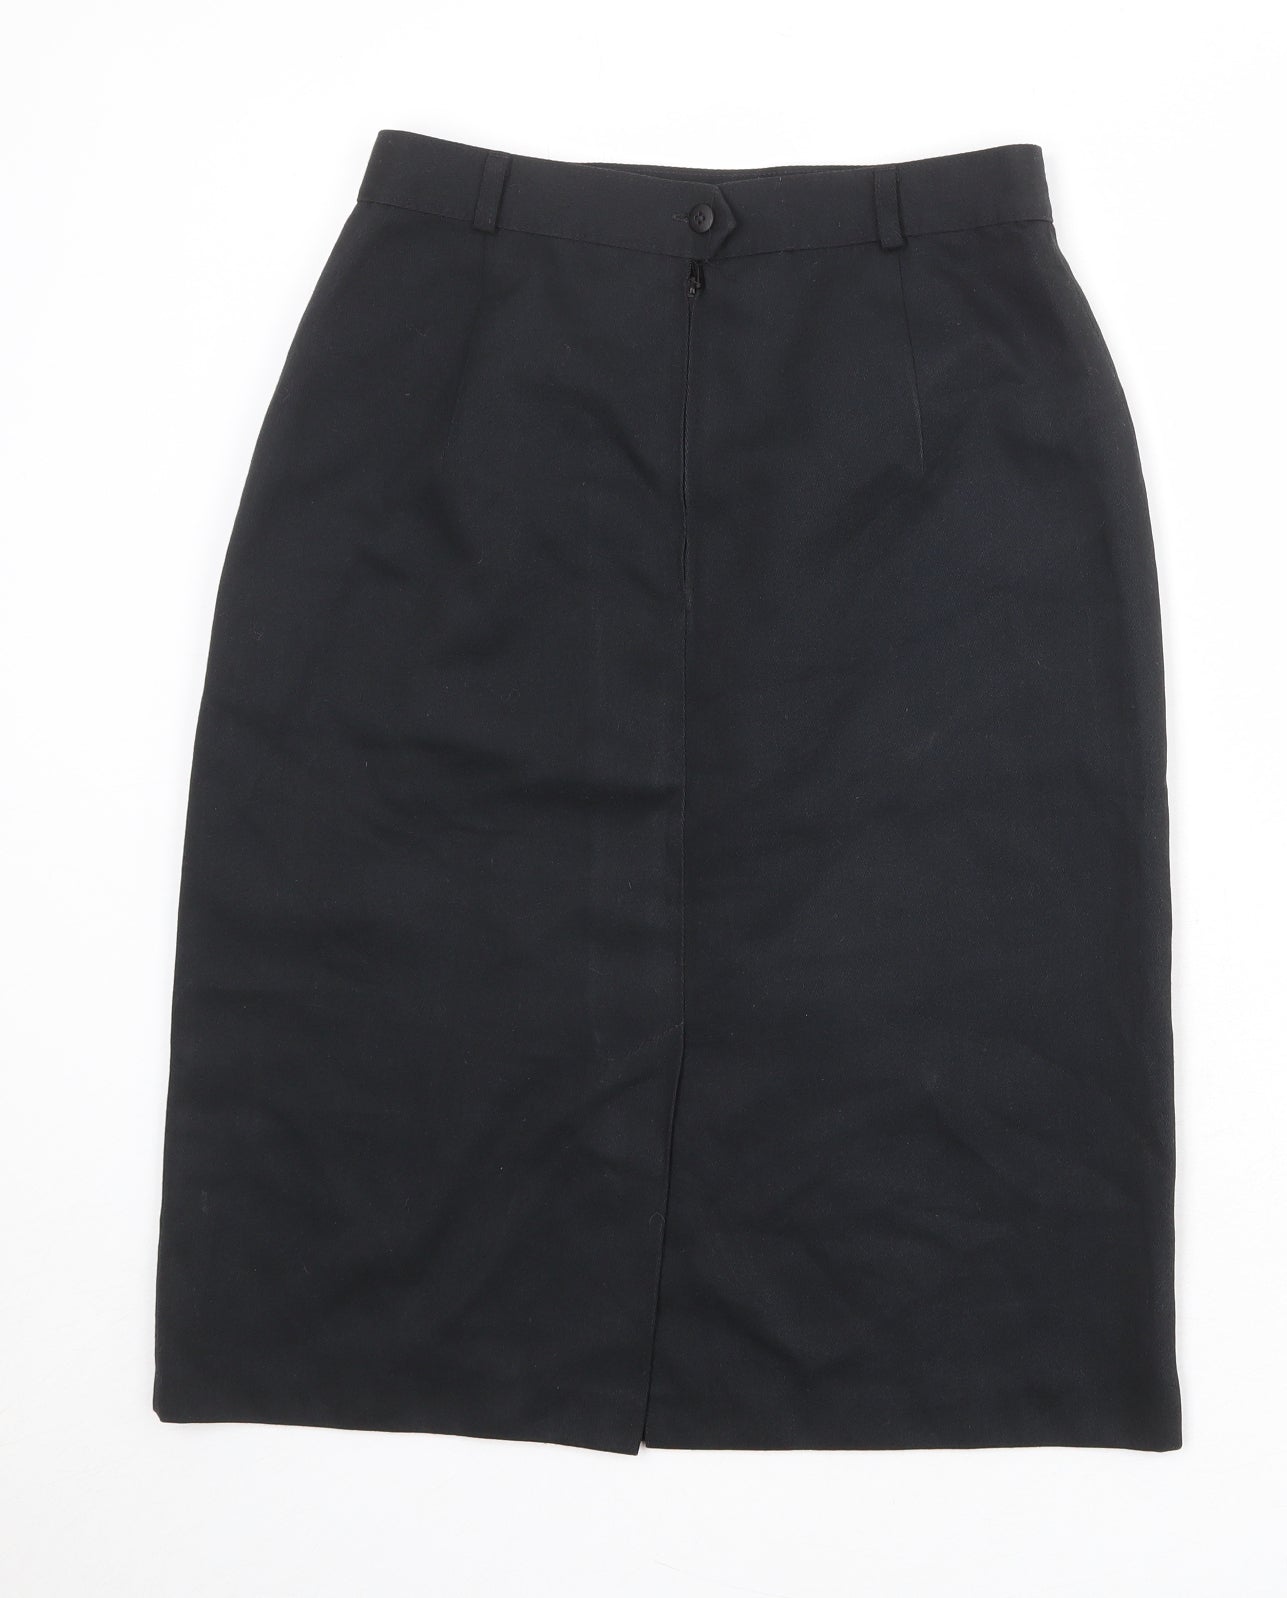 C&A Womens Black Polyester Straight & Pencil Skirt Size 14 Zip